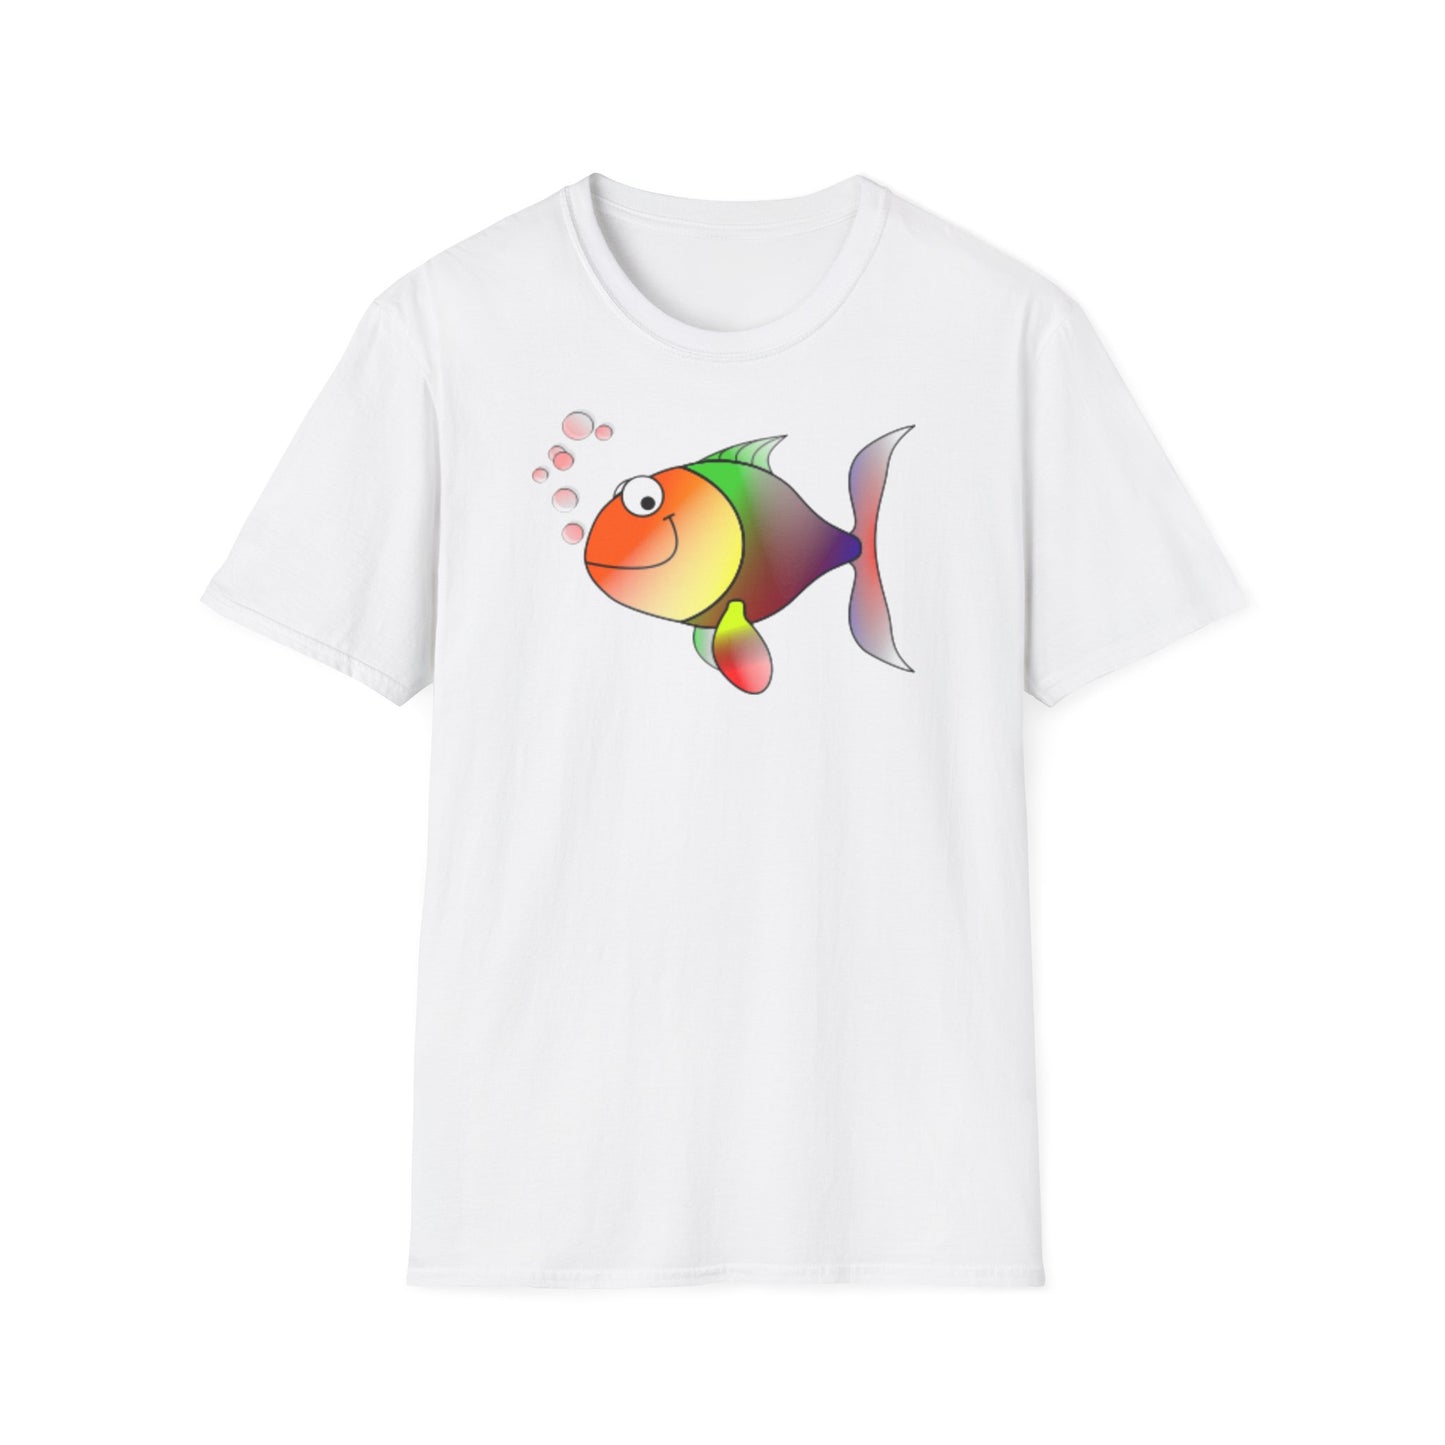 A white t-shirt with a design of a smiling rainbow coloured fish